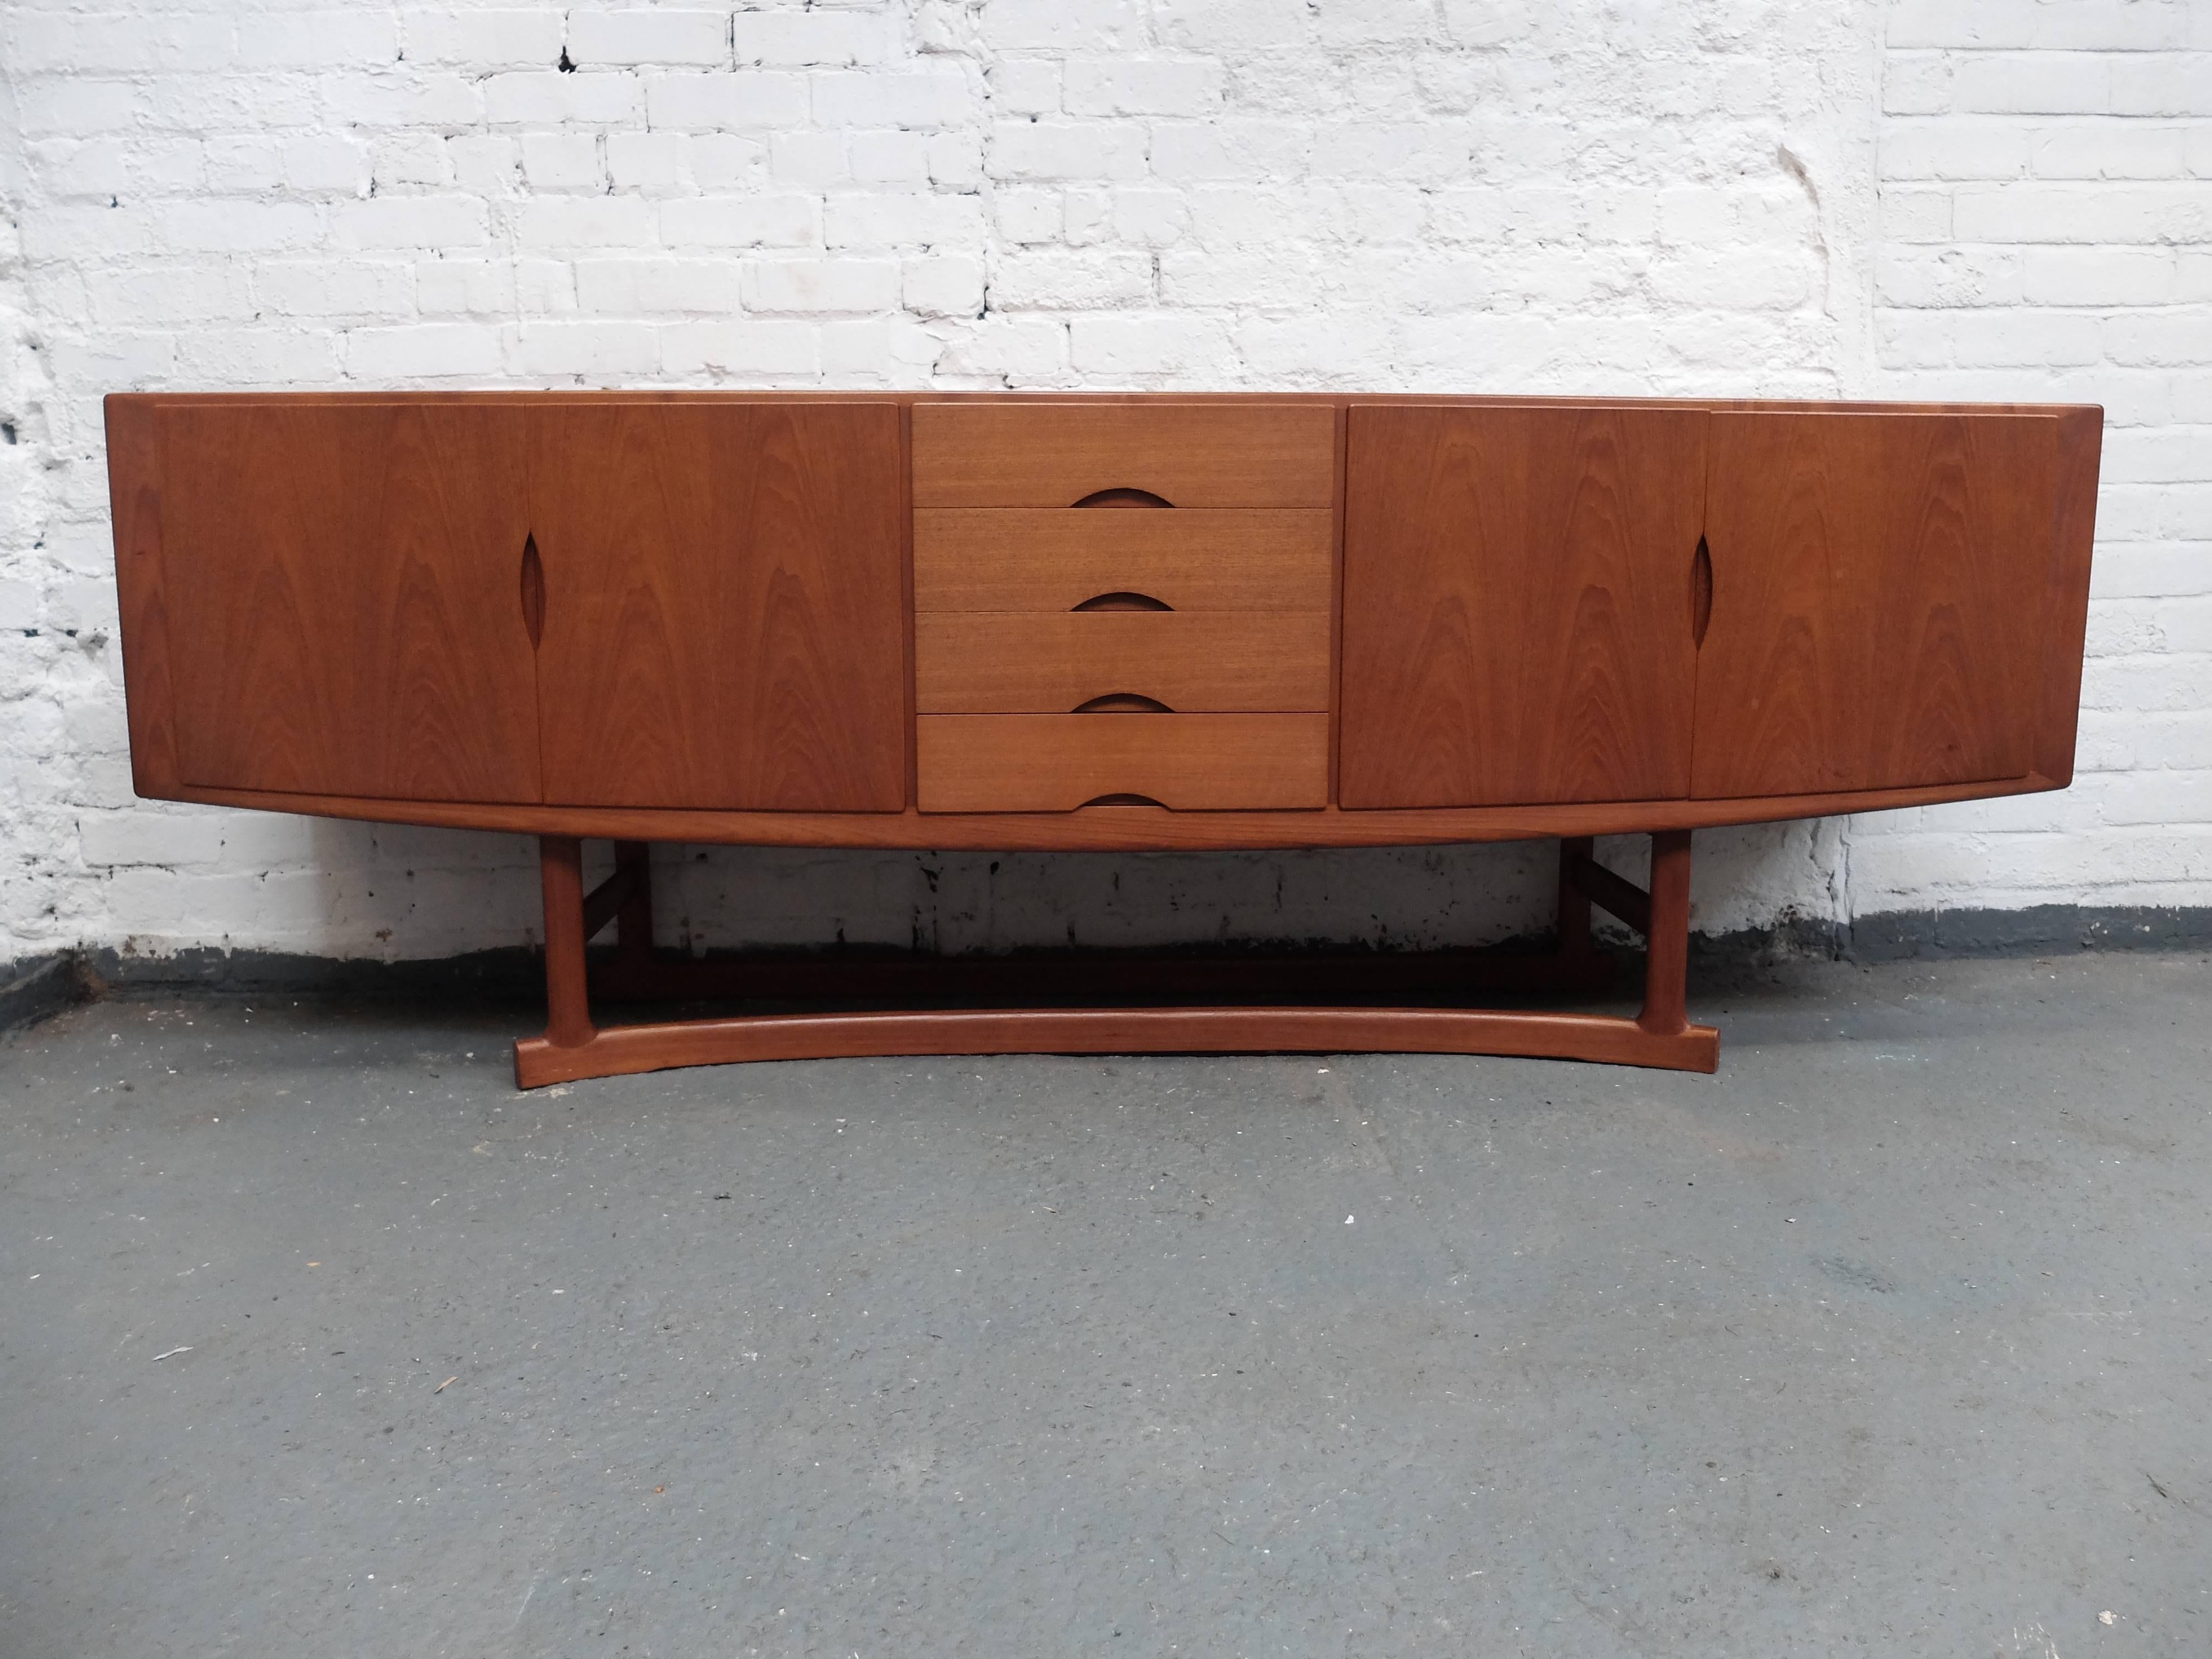 Stunning vintage teak sideboard by Johannes Andersen for Hans Bech. 
Model number HB20.
Made in Denmark
Subtle curves and strong teak grain, stylish and functional. 
Four drawers to the centre, two are felt lined.
Cupboards either side, one